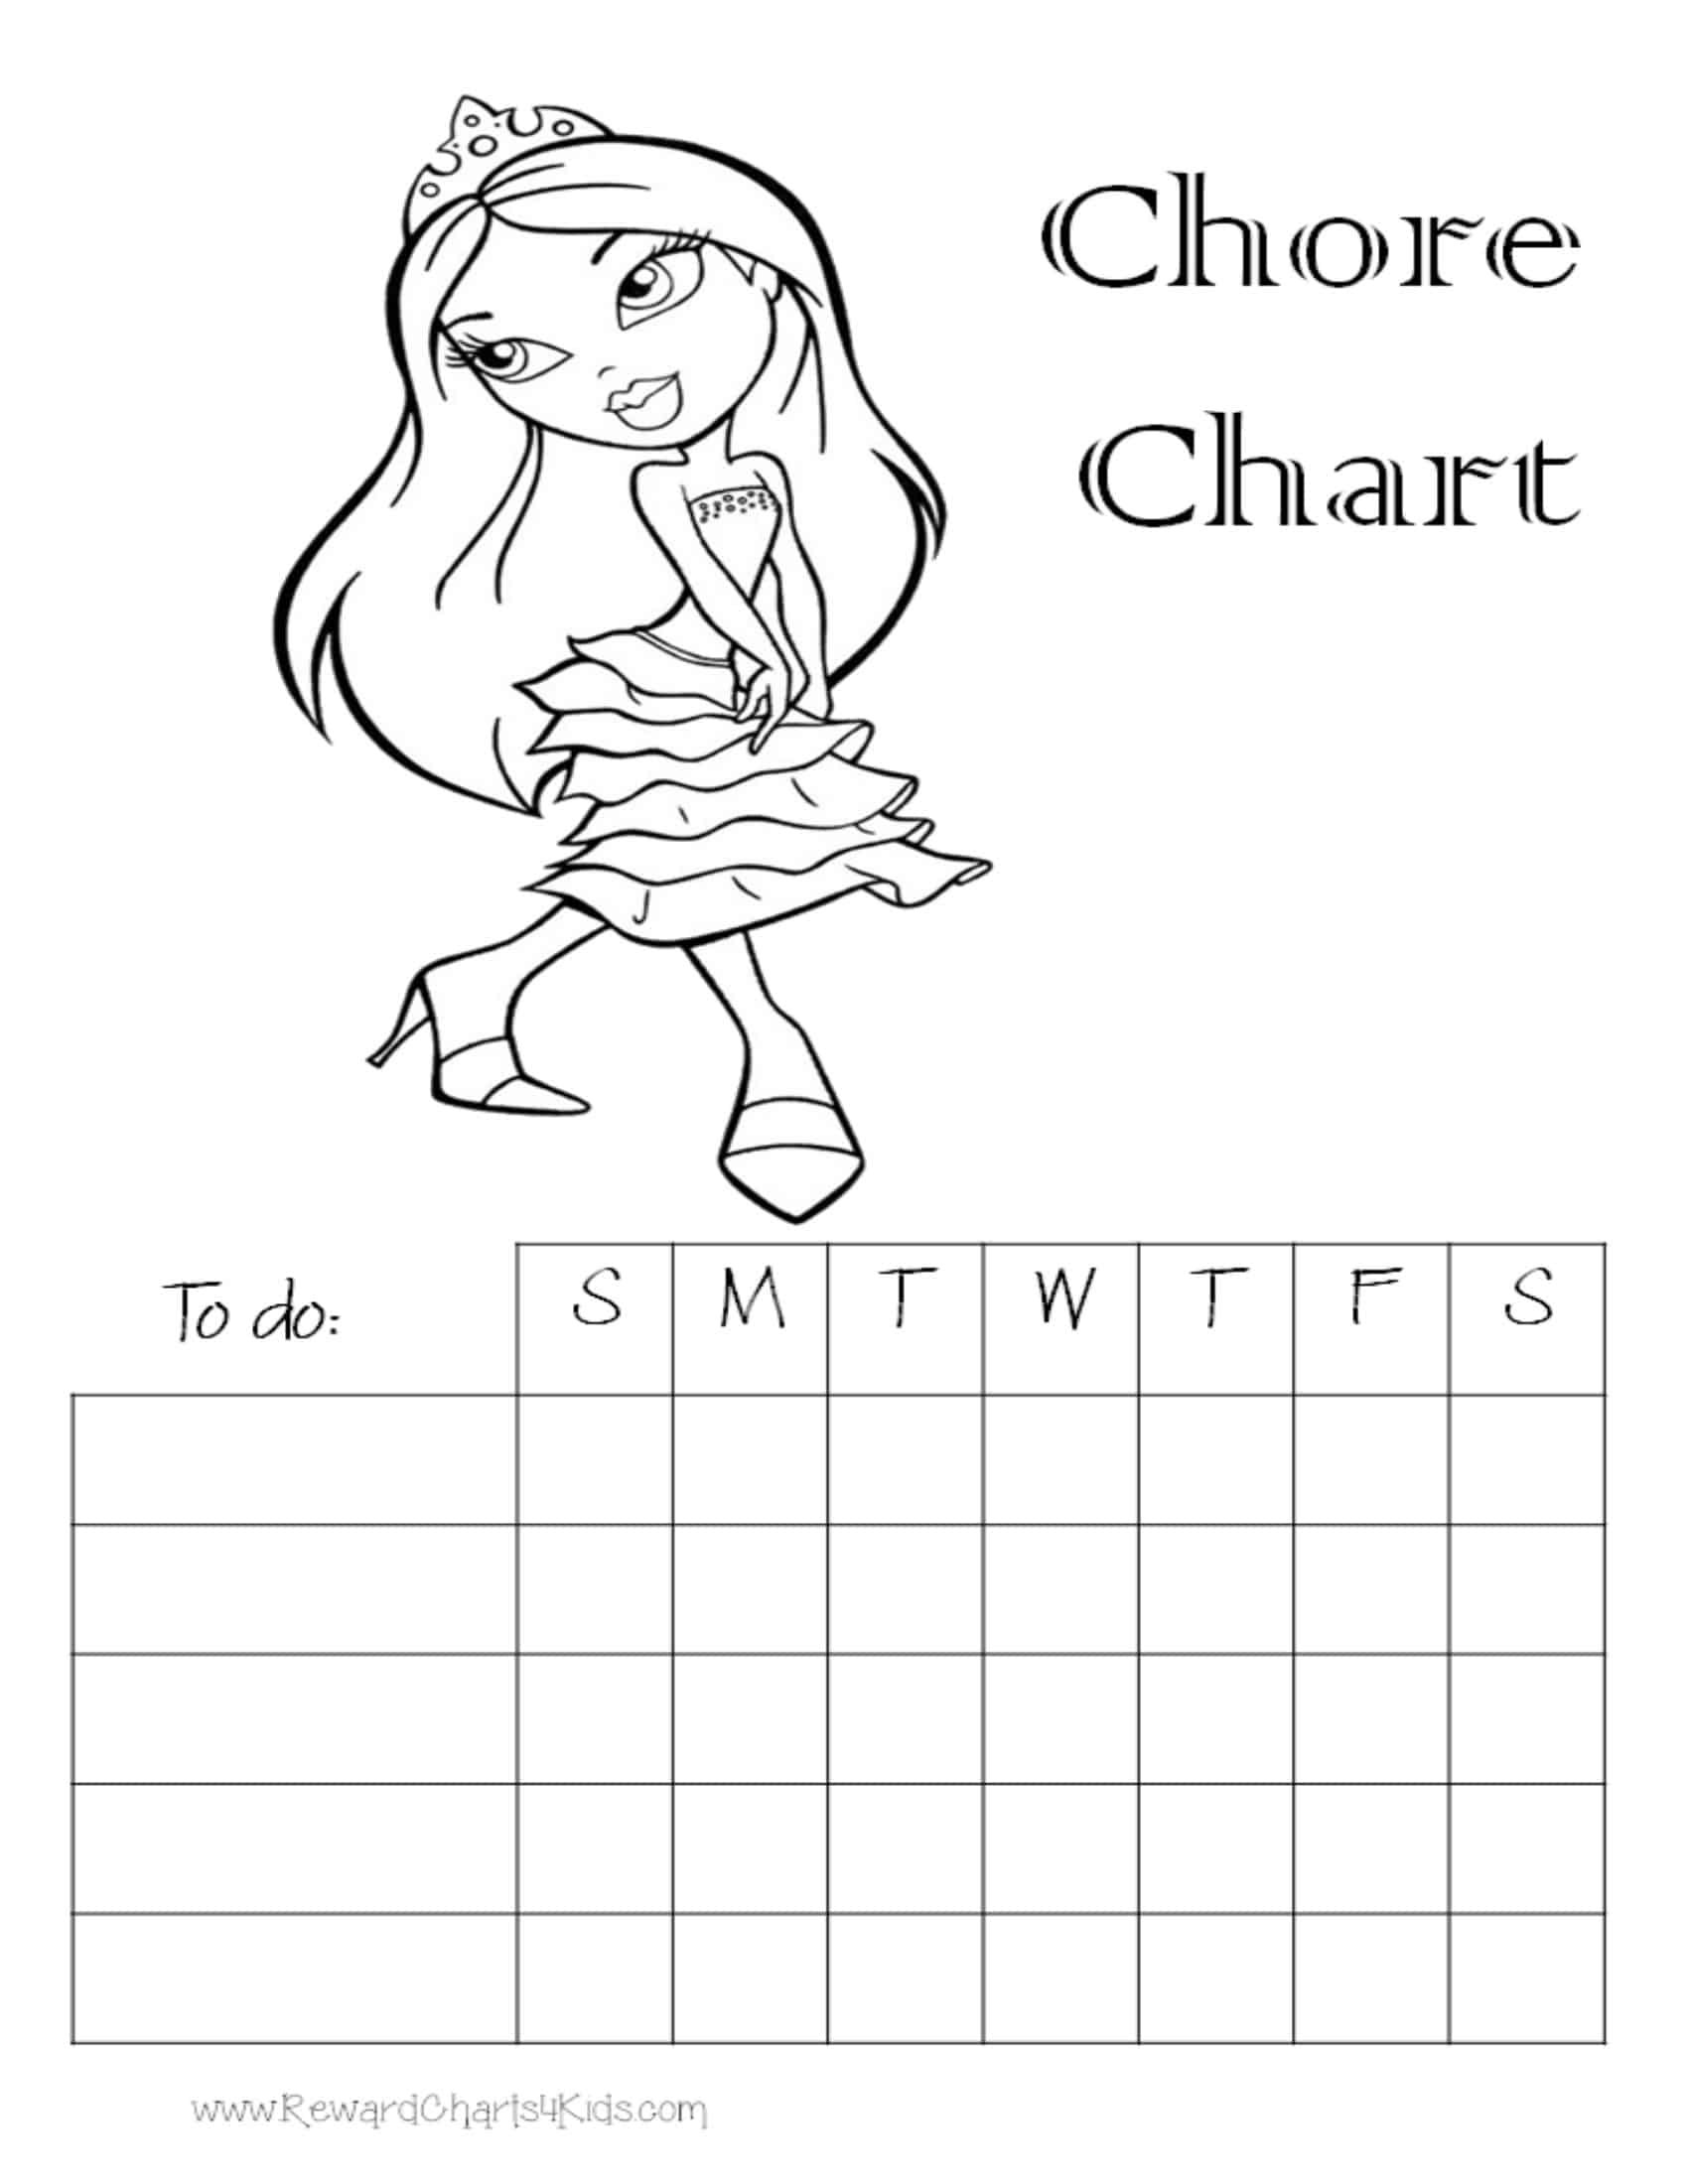 Preschool Coloring Sheets With Household Chores On Them
 Household Charts Free Colouring Pages